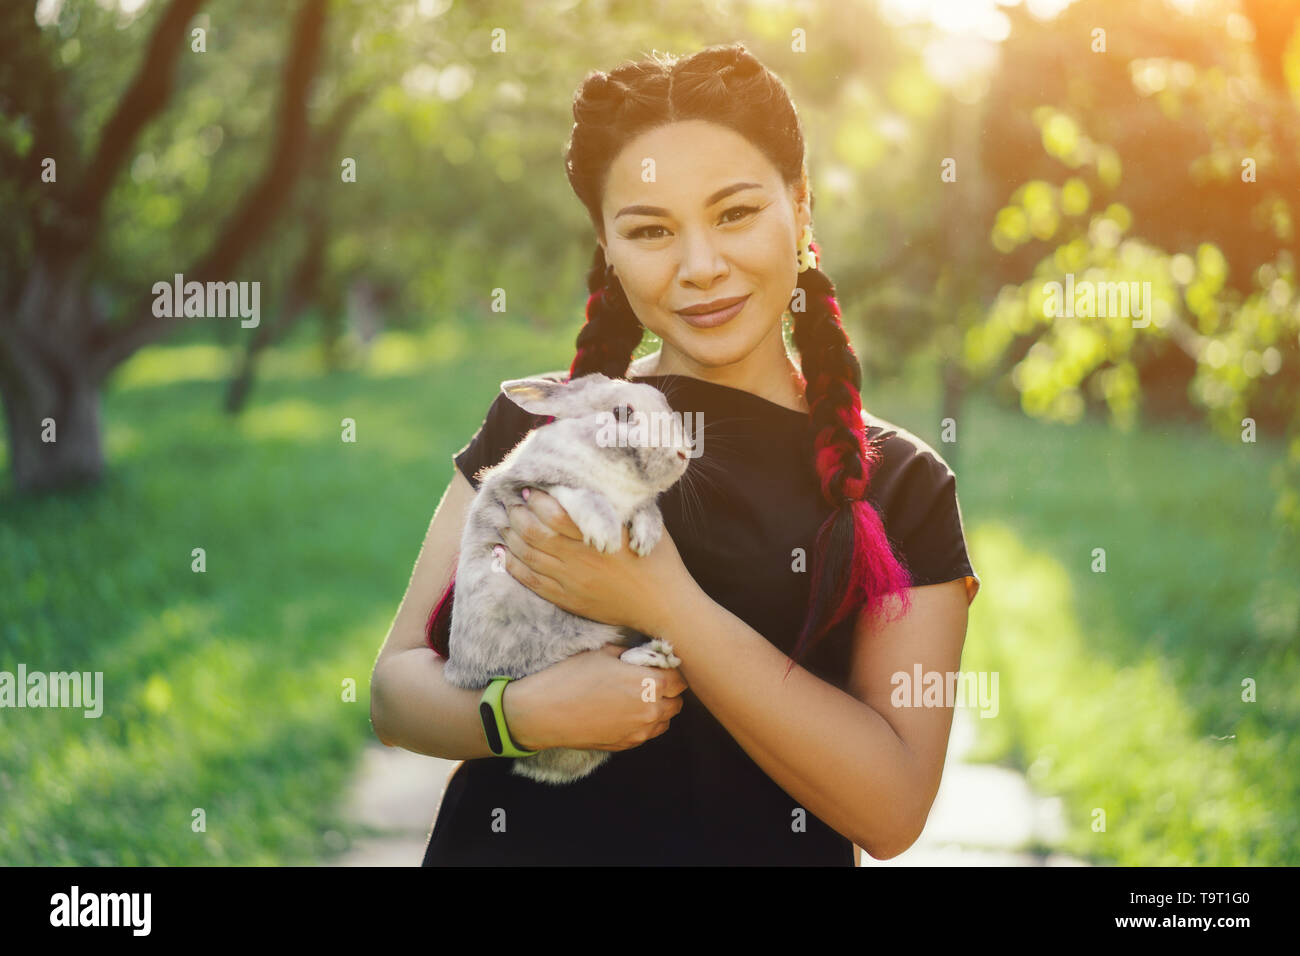 Pretty Asian Girl Hugging Bunny on Summer Nature Stock Photo